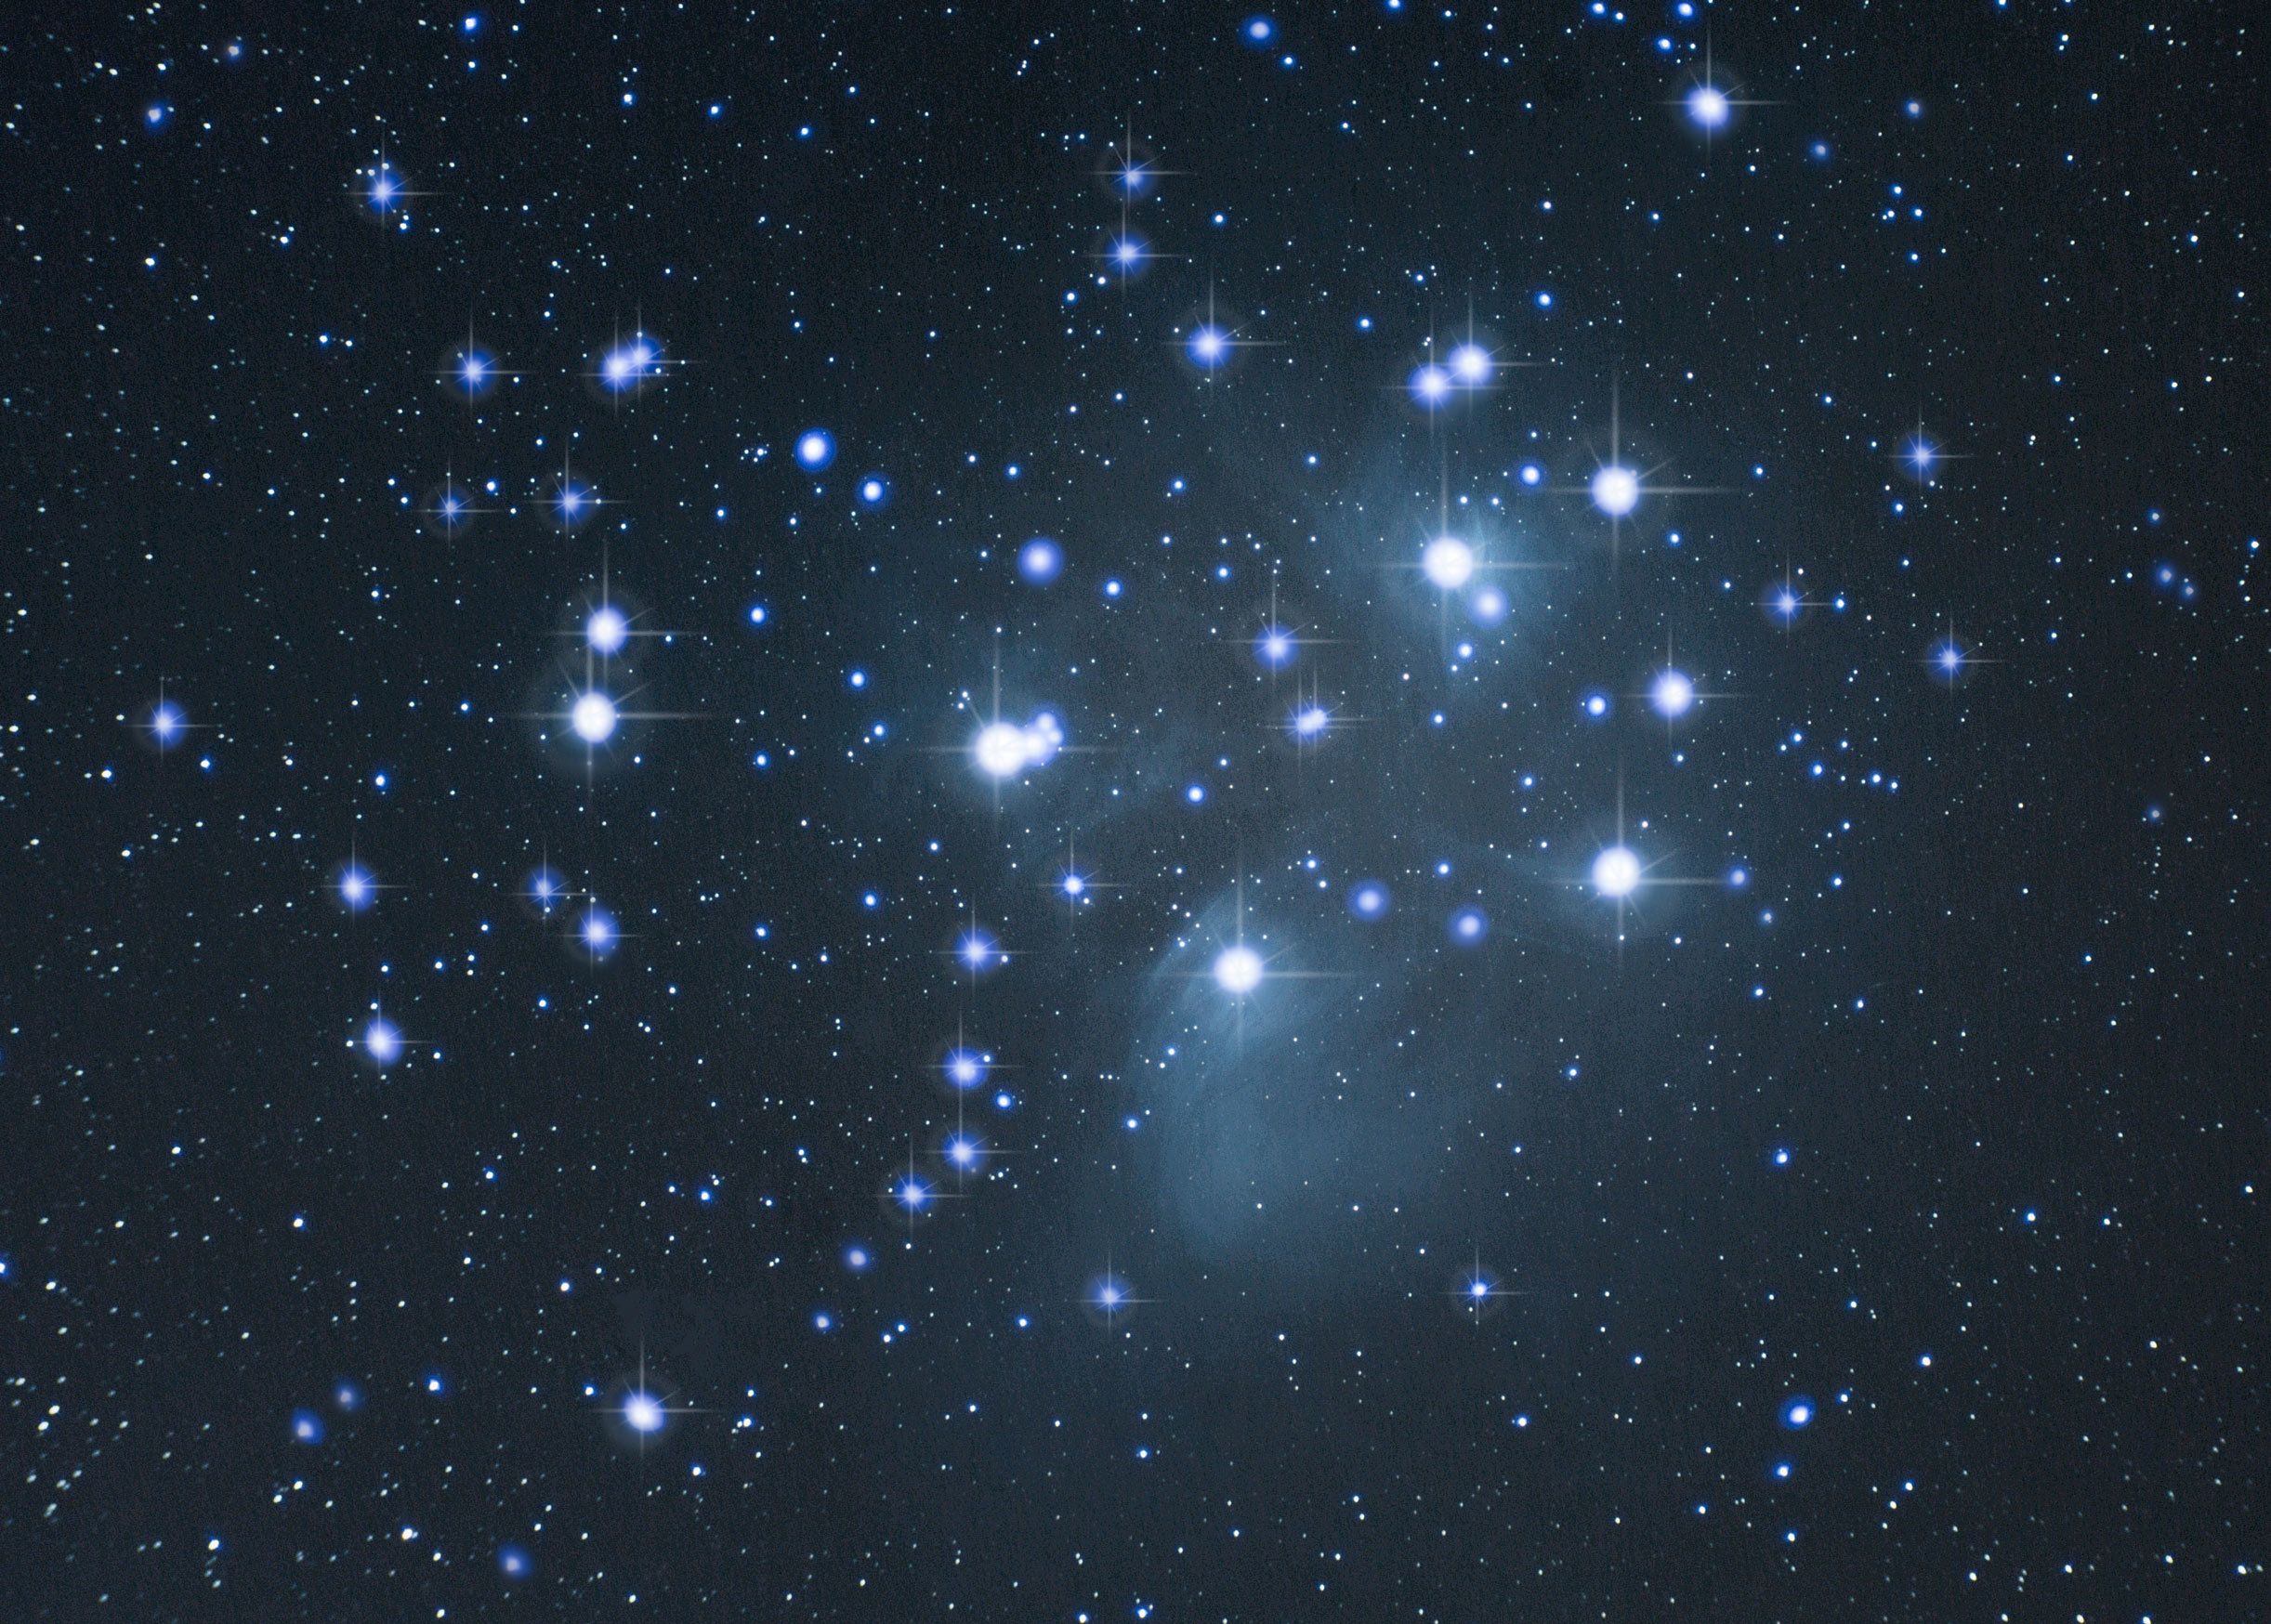 M45 - Pleiades at Orion Store